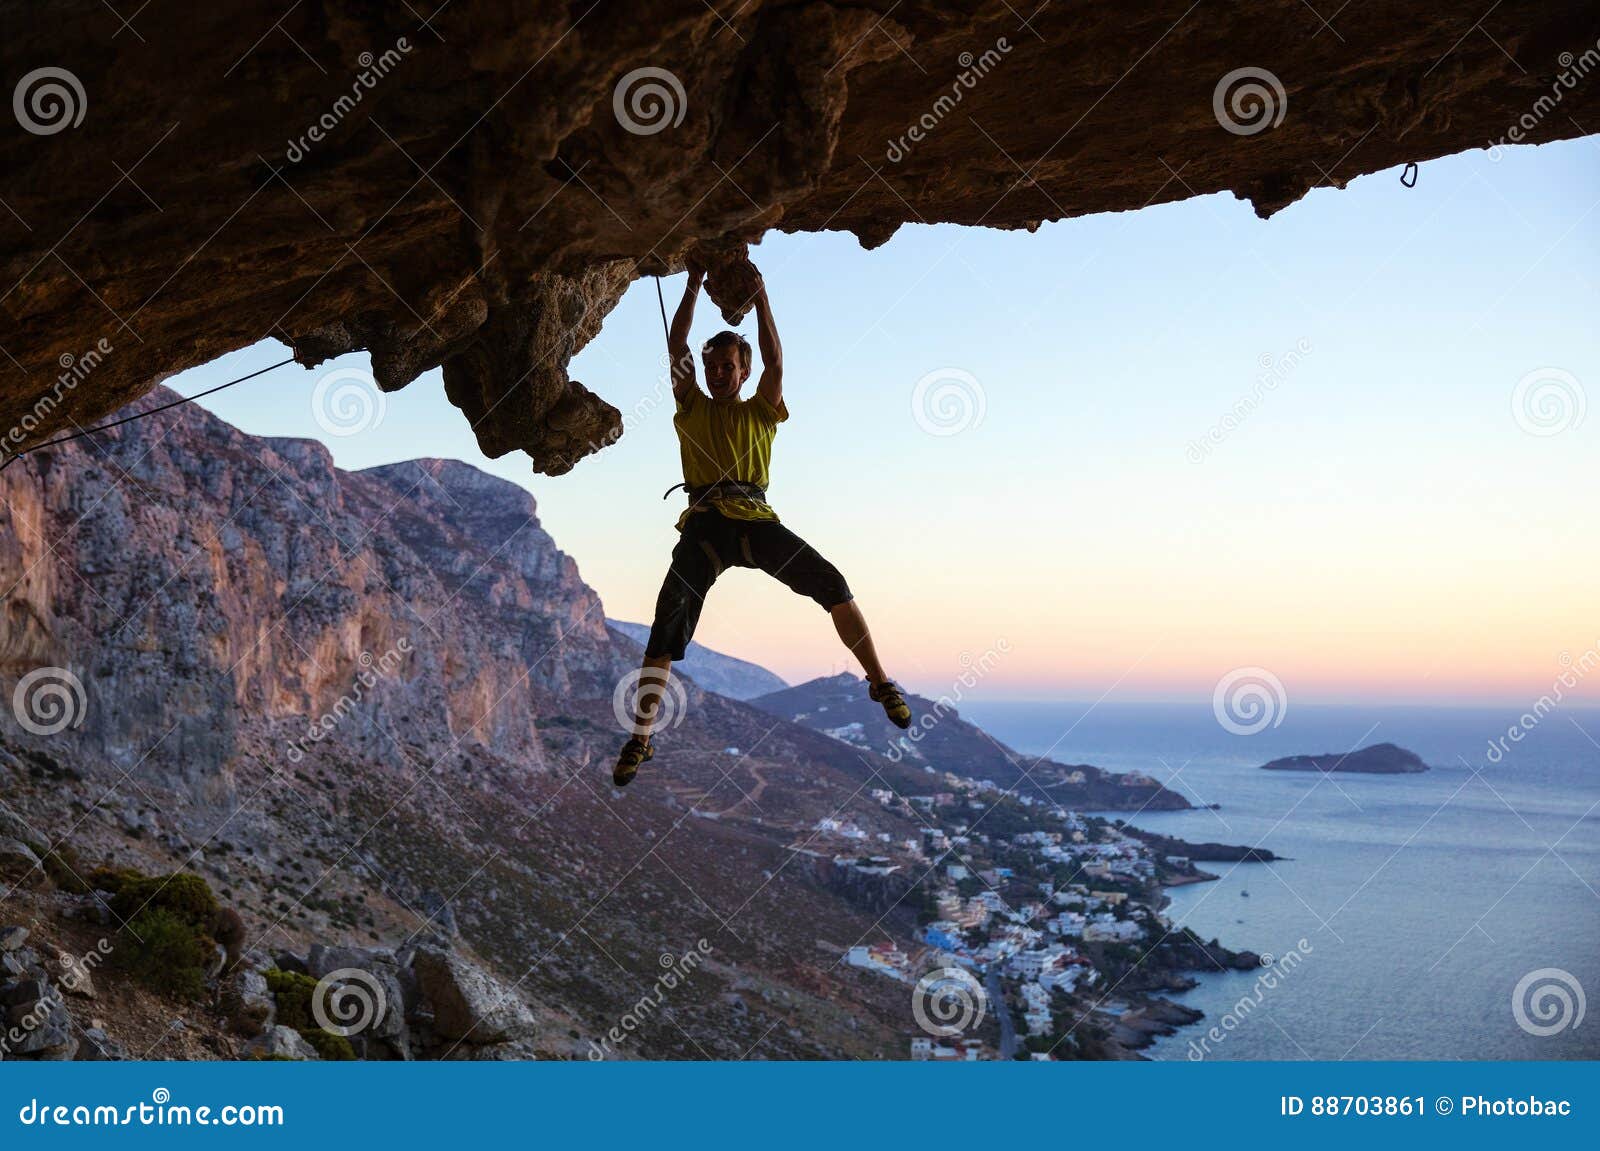 male rock climber gripping handhold on ceiling in cave